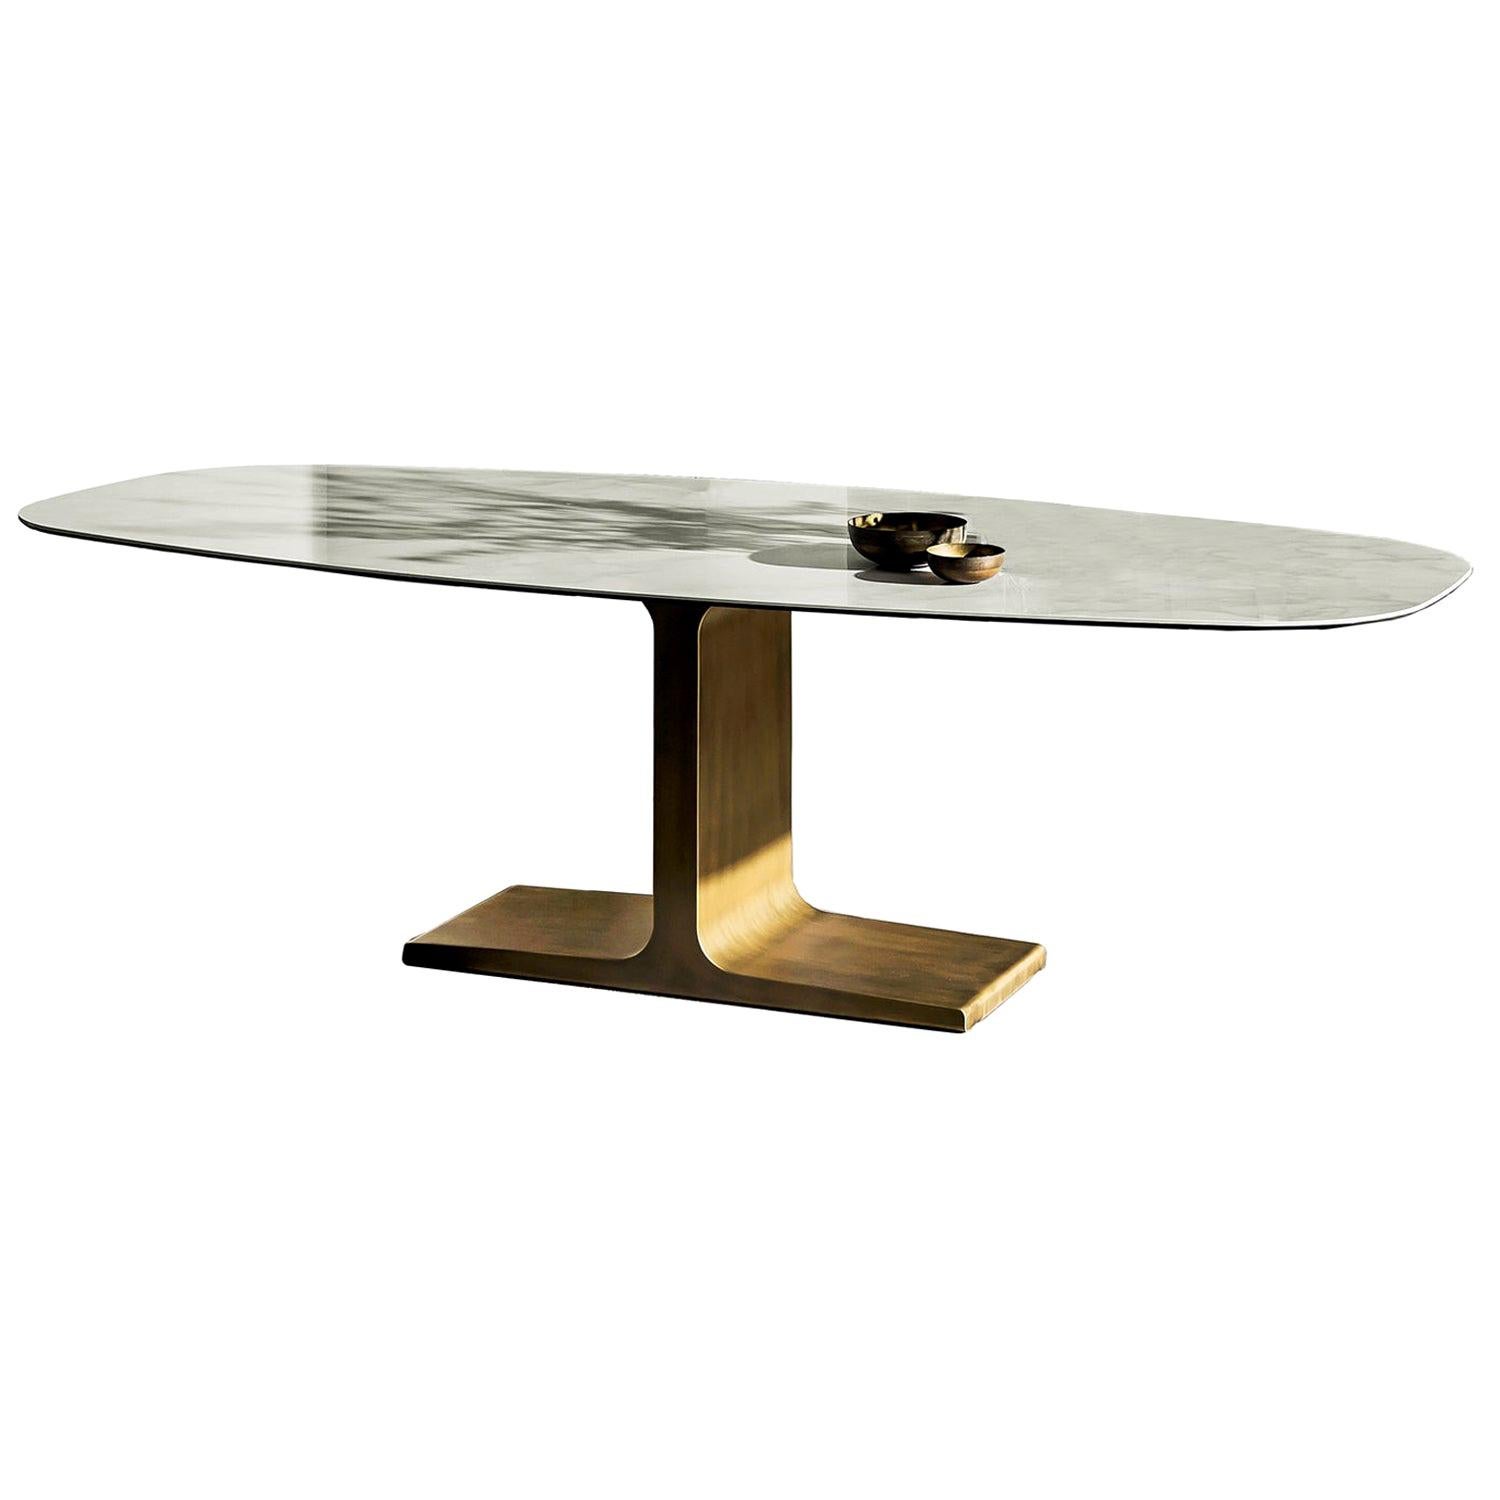 In Stock in Los Angeles, Brass / Ceramic Dining Table by Lievore Altherr Molina